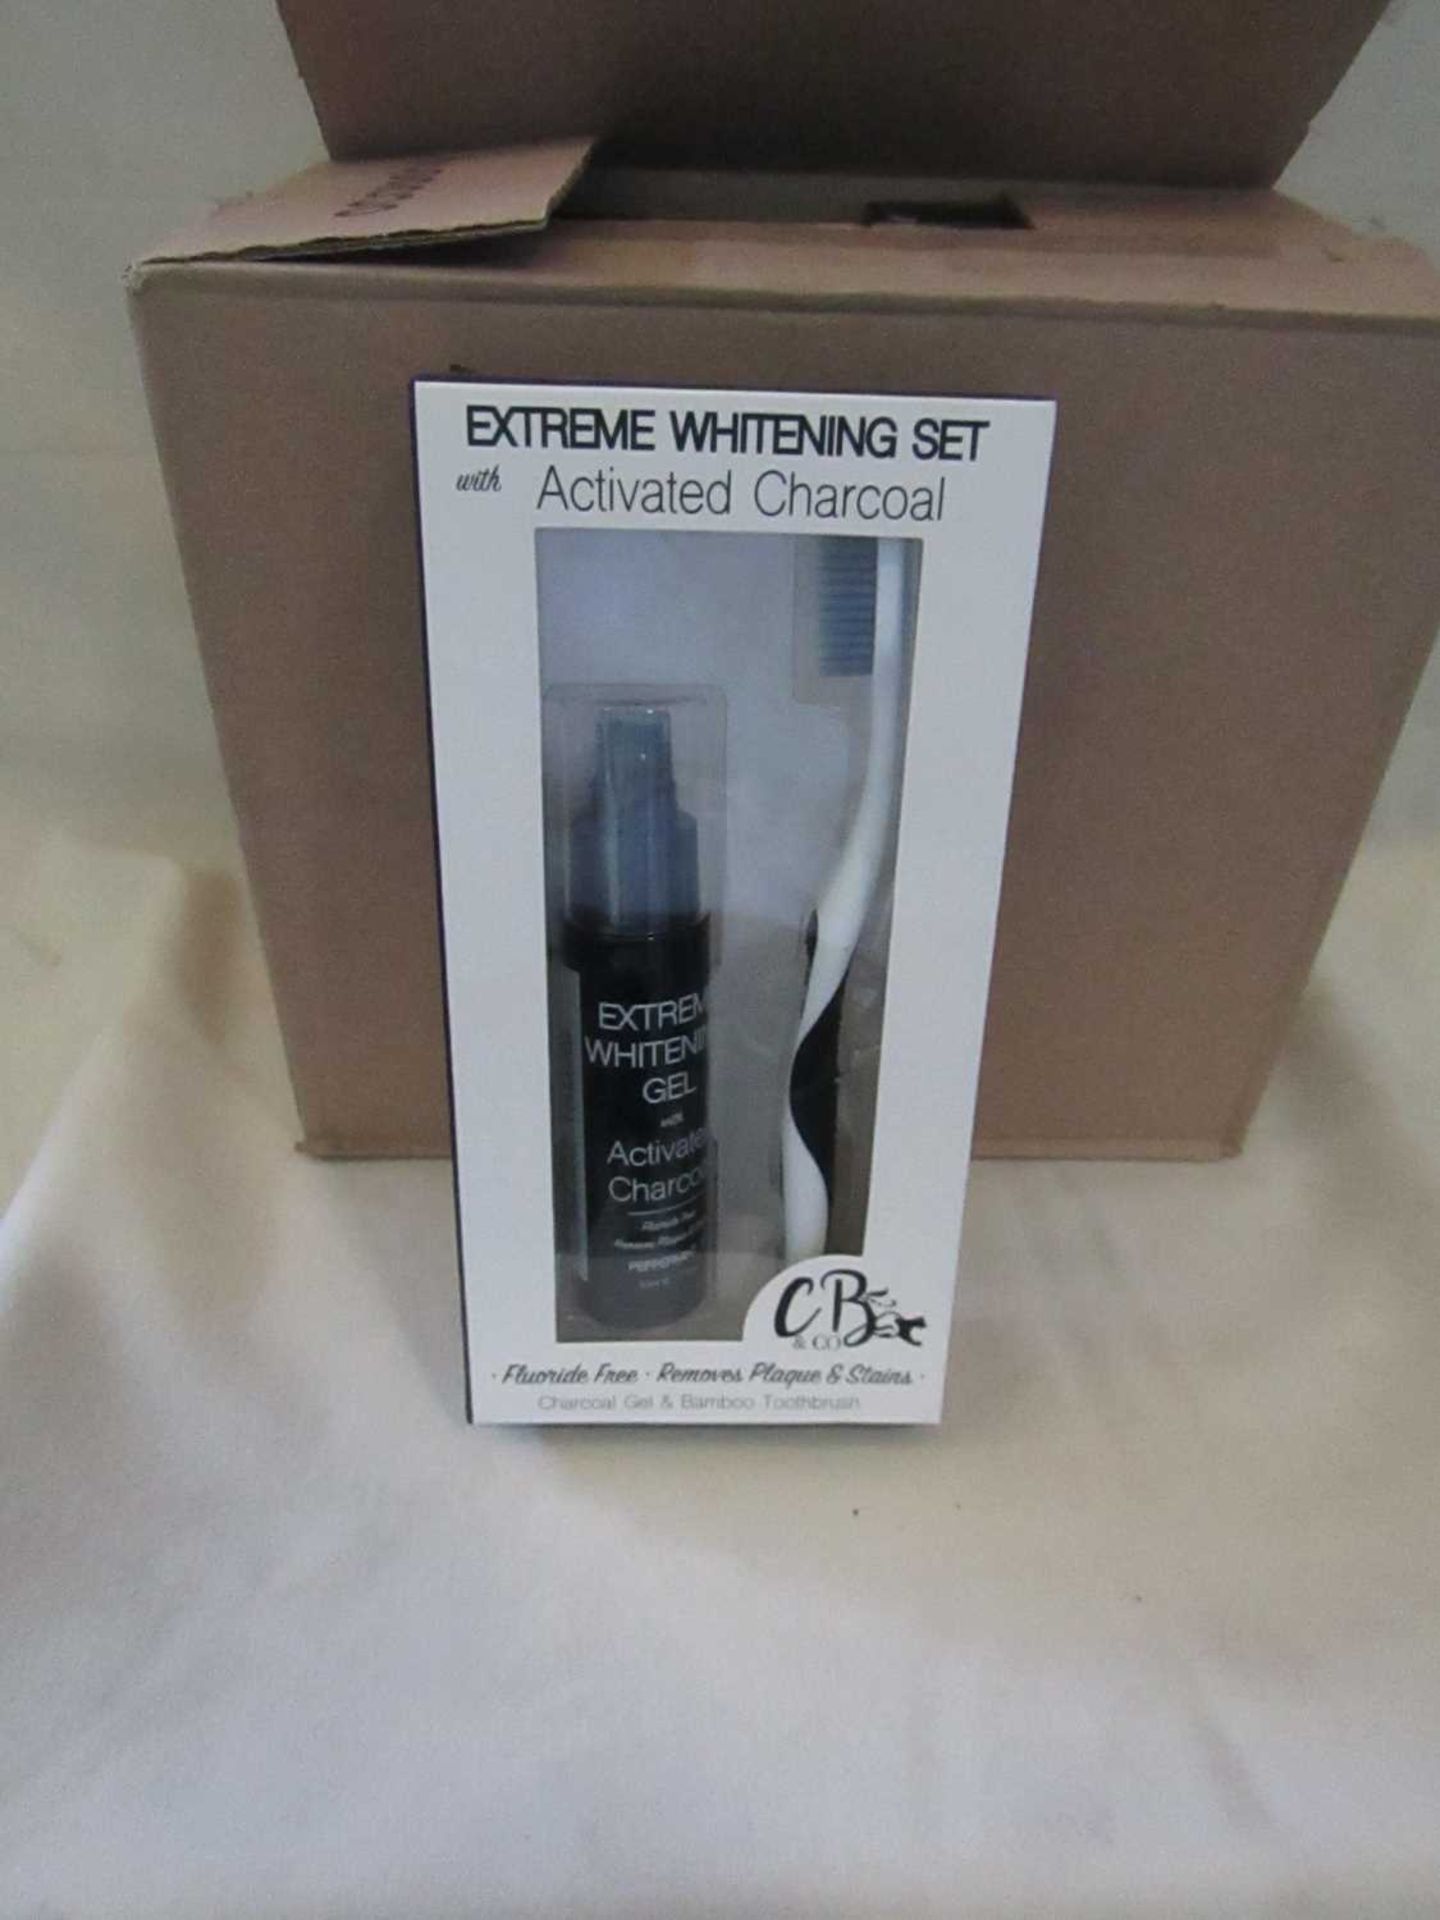 8x Instant Results - Extreme Whitening Set With Activated Charcoal - Includes Toothbrush - New &